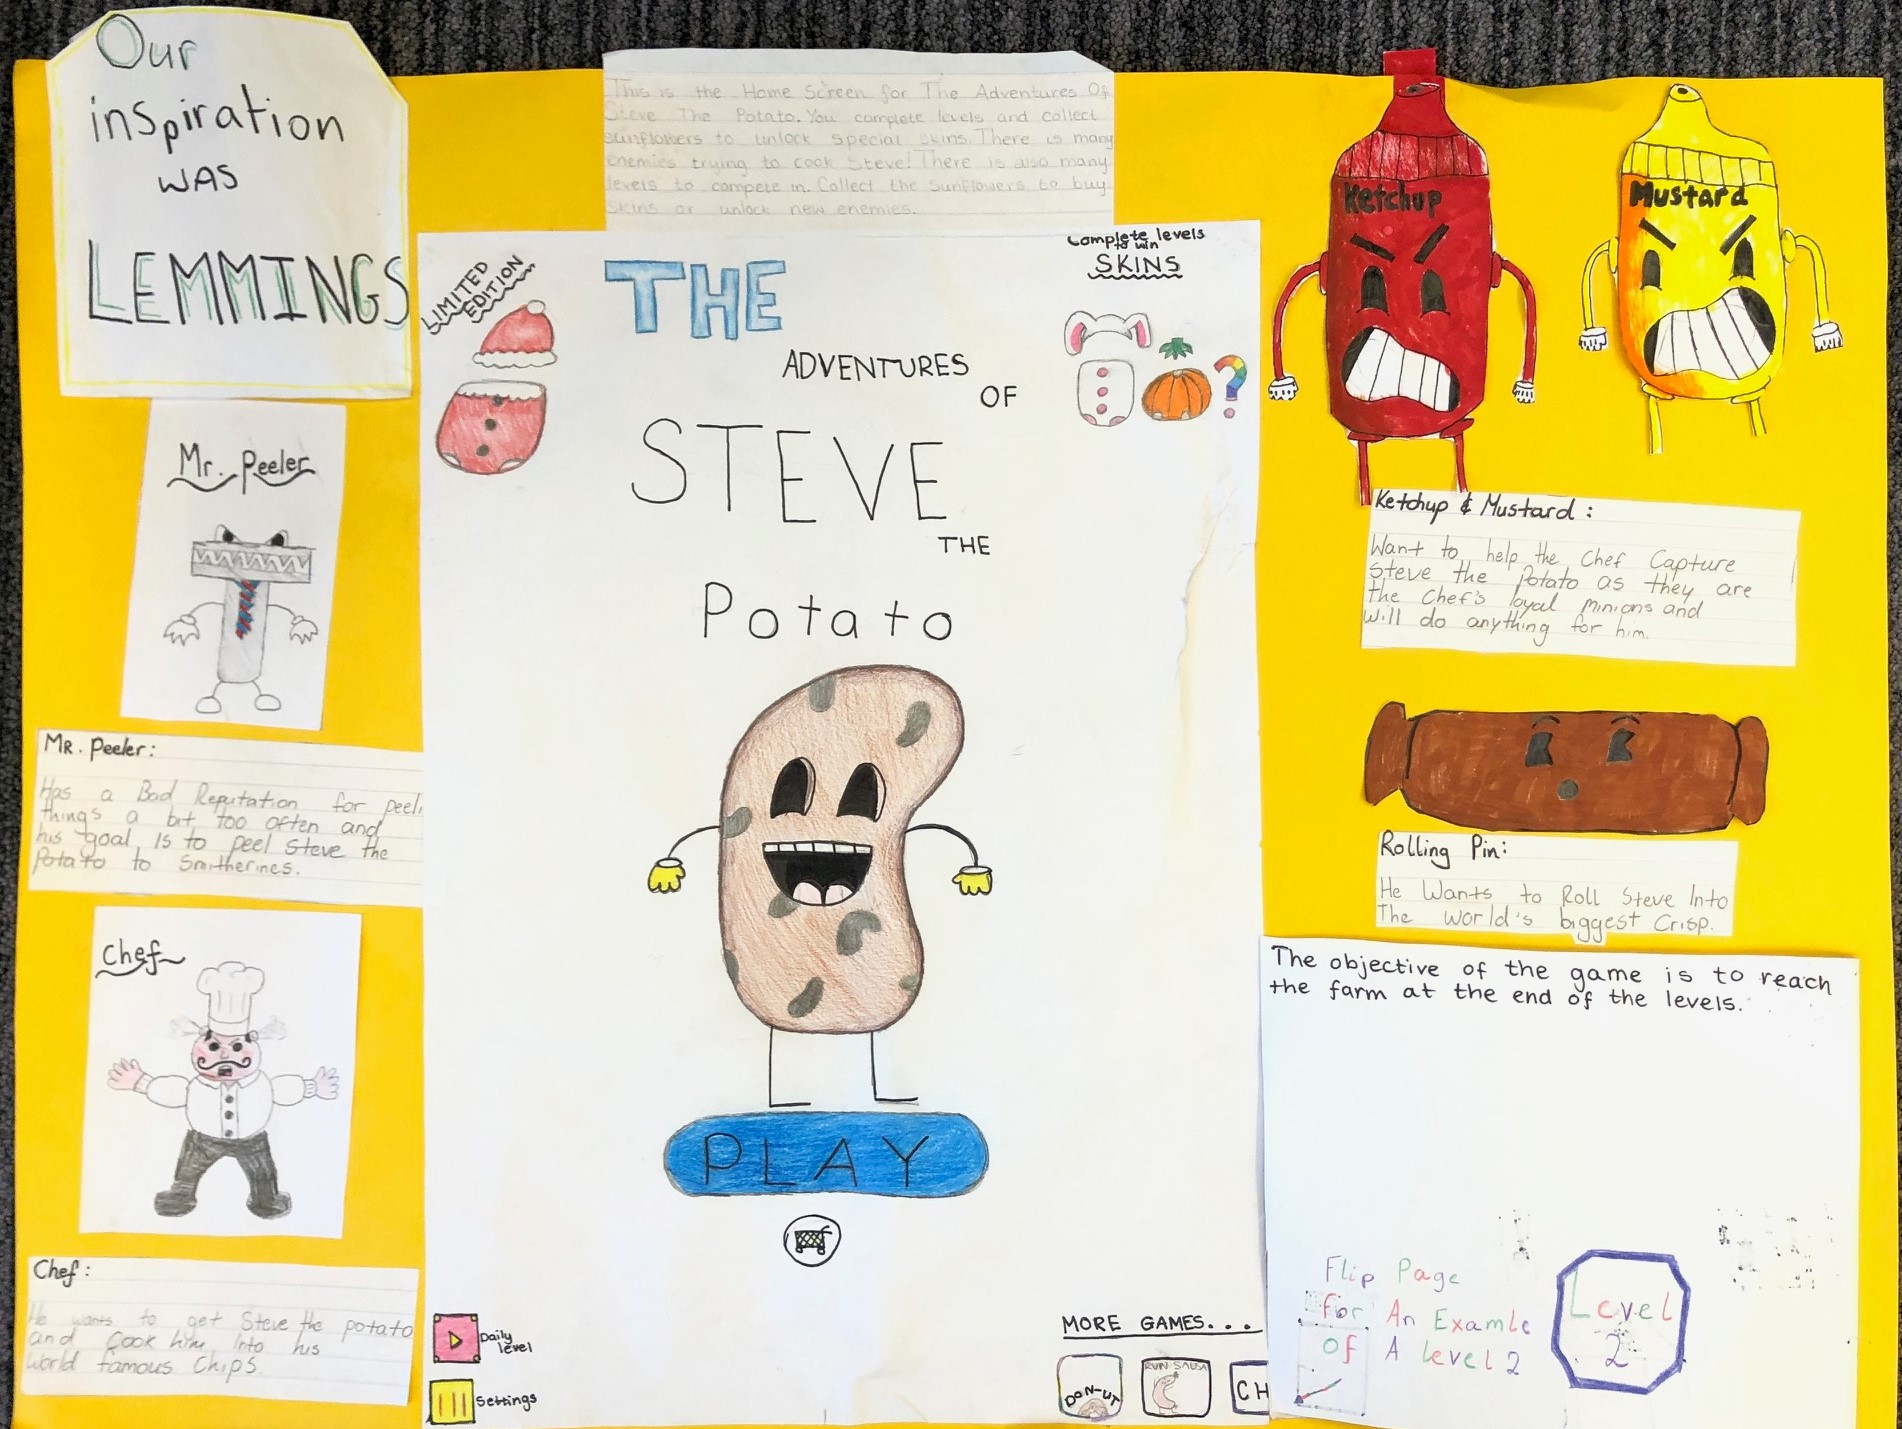 A large poster of children's drawings describing the 'adventures of Steve the potato'